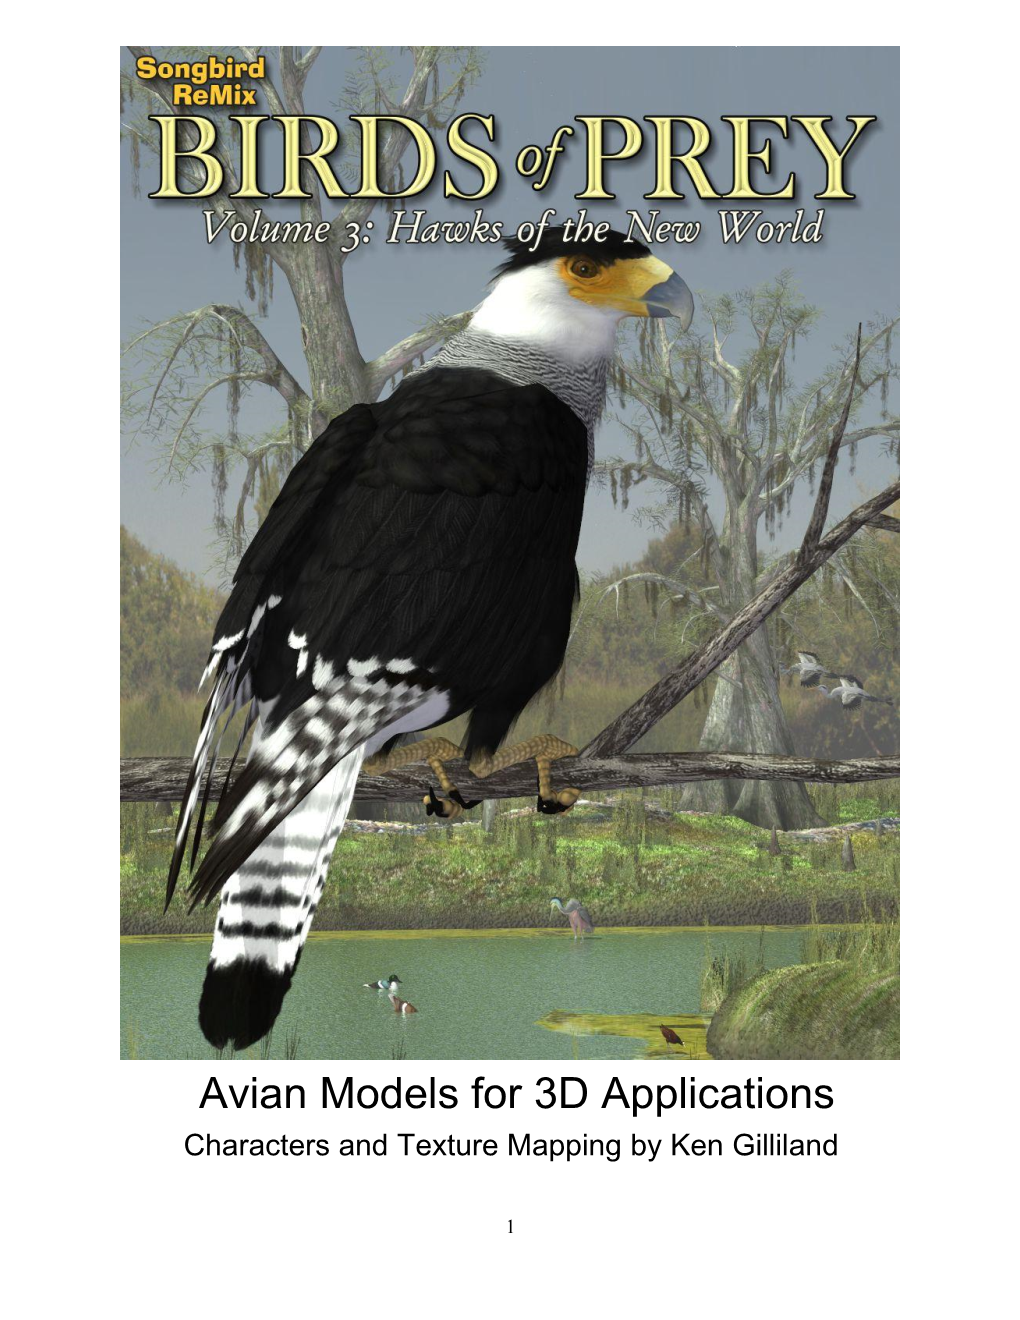 Avian Models for 3D Applications Characters and Texture Mapping by Ken Gilliland